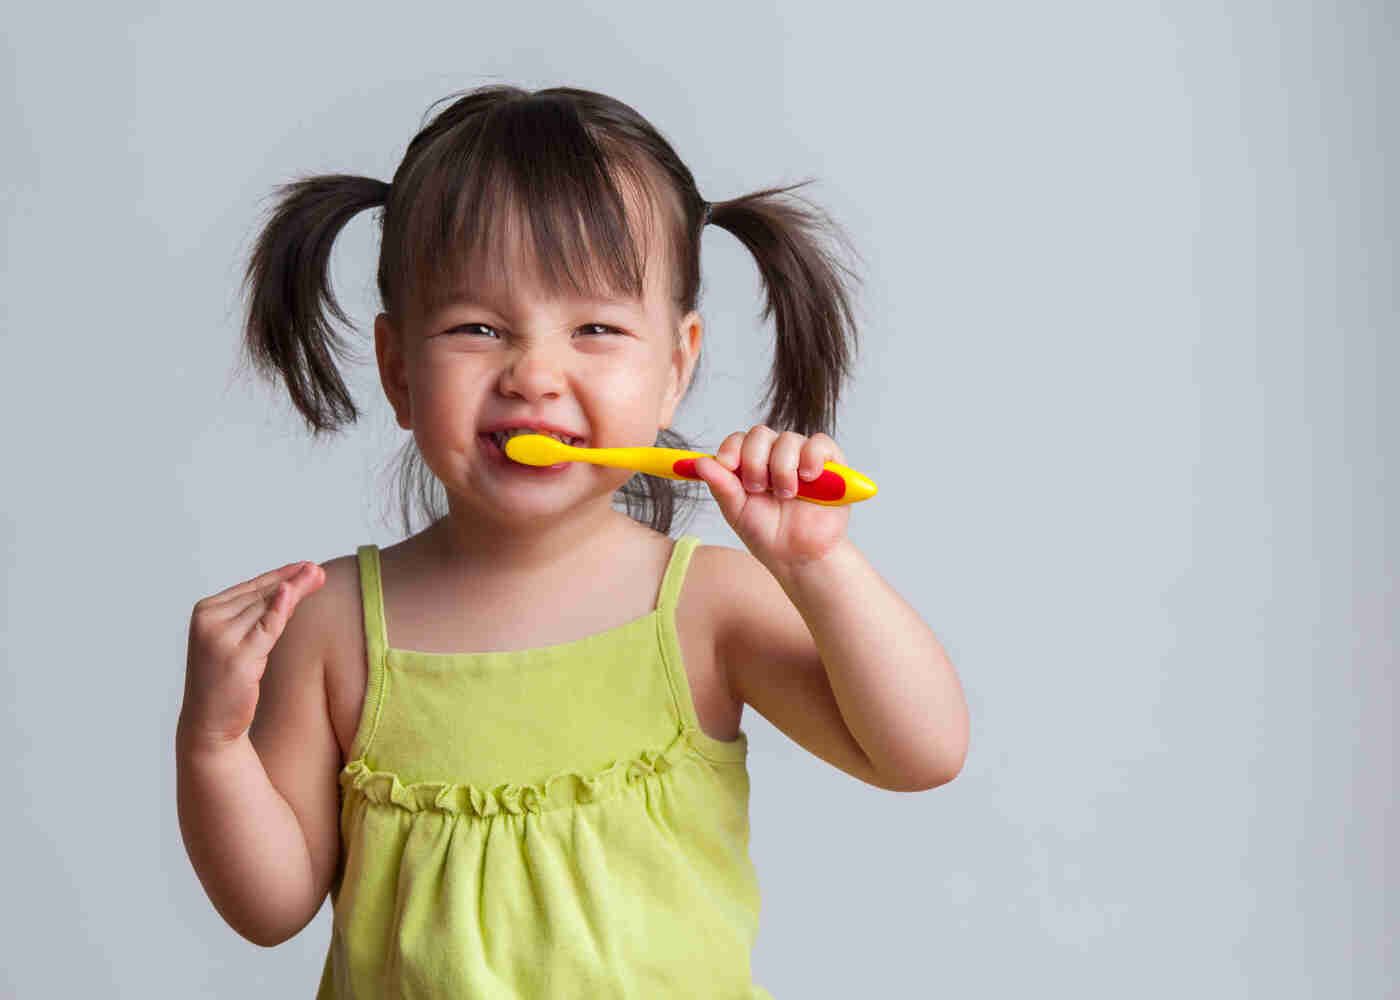 Cute little girl with ponytails is brushing her teeth